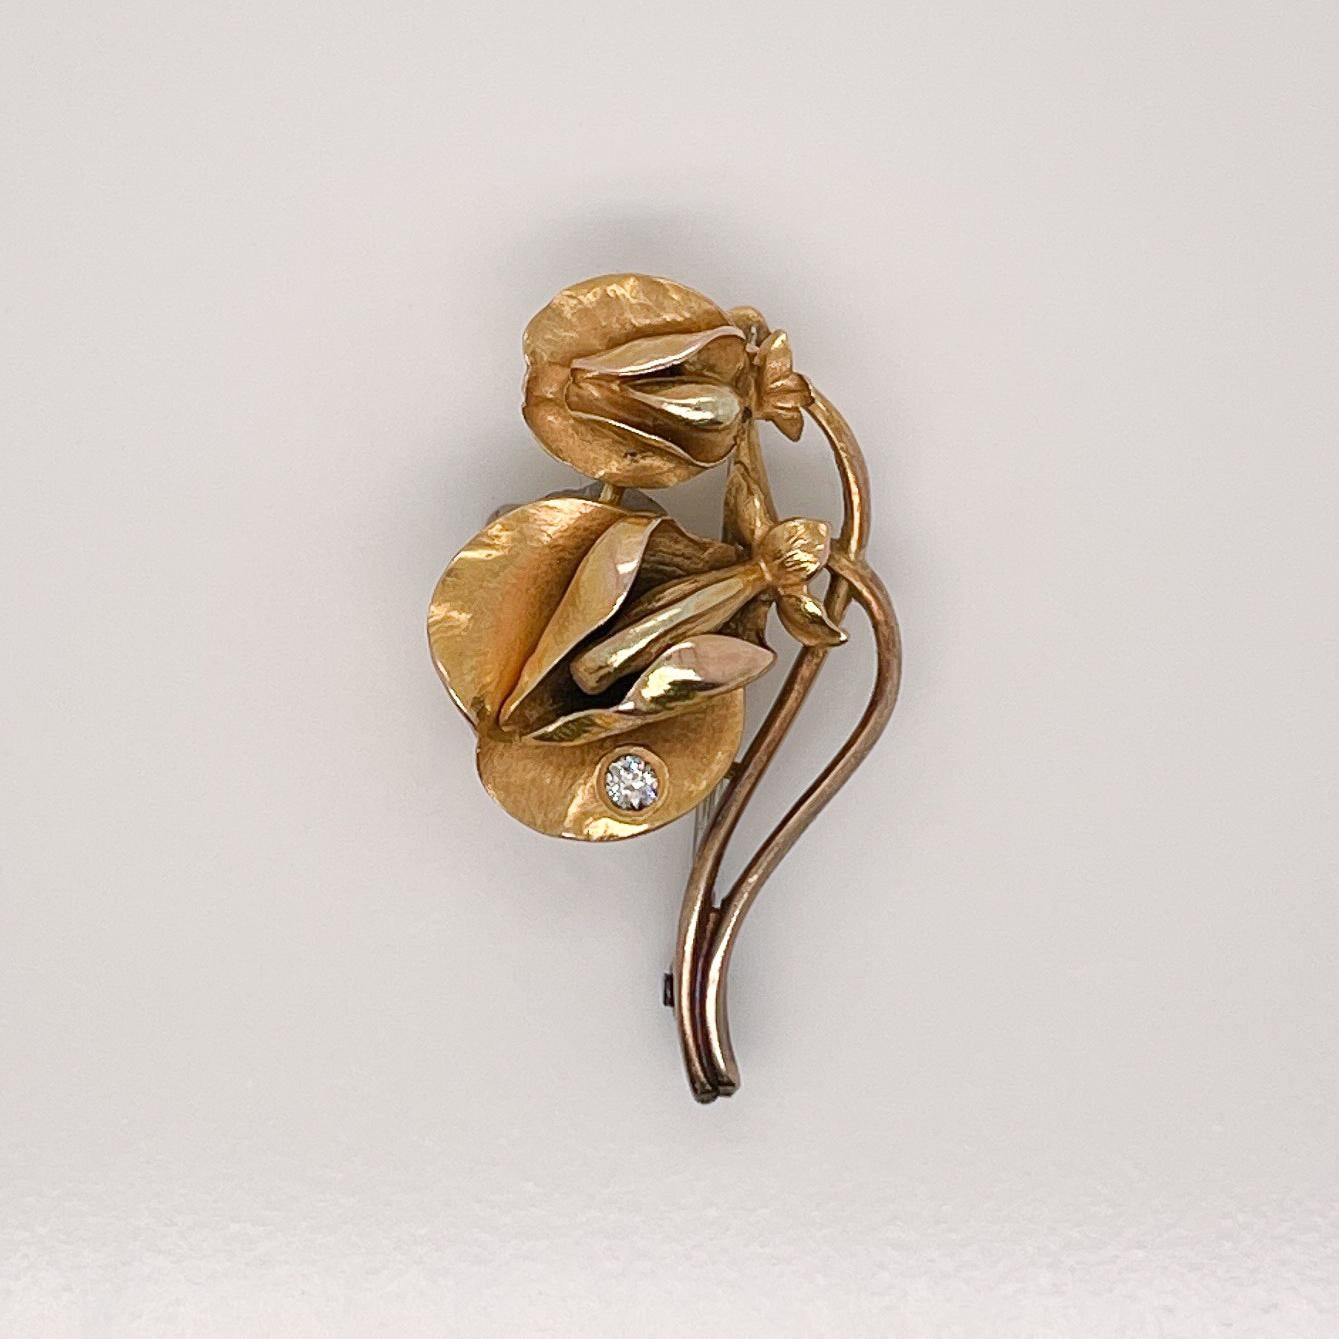 A very fine signed gold and diamond brooch.

With two finely modeled Butterfly Pea flowers (Centrosema Virginianum) in 14k yellow gold. The butterfly pea flower is known for its unique petals and wonderful viney growth. 

The larger of the two